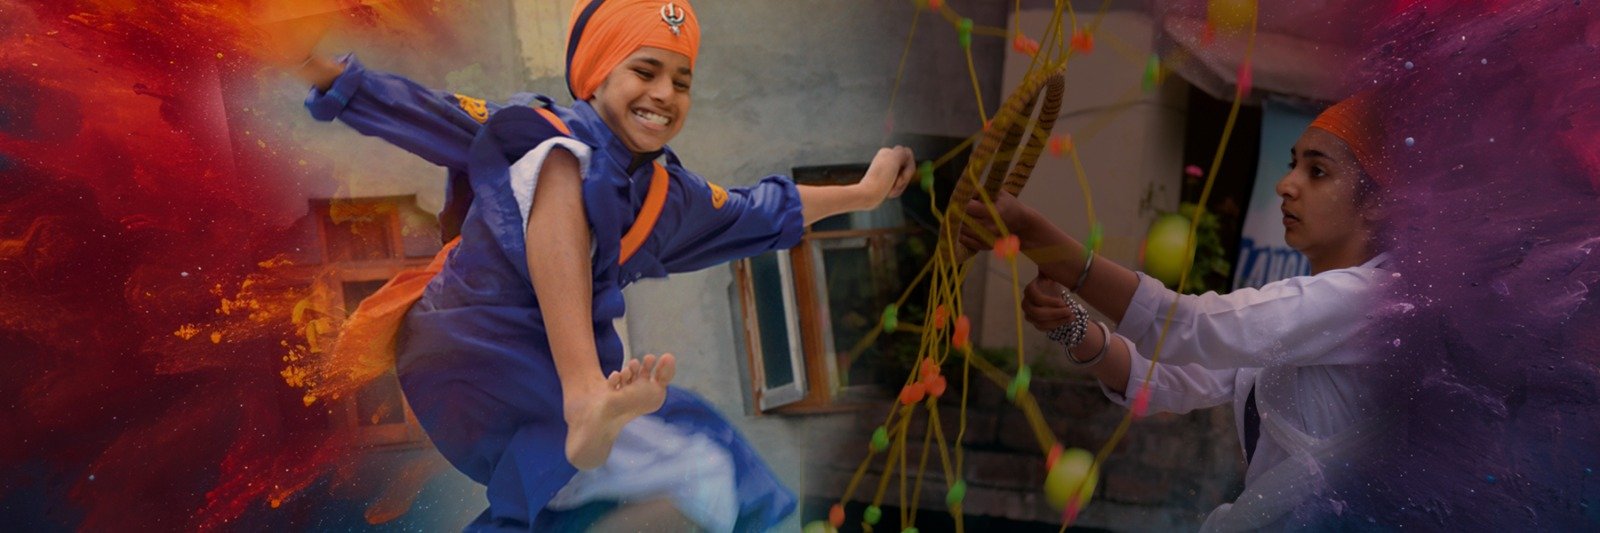 The Traditions of Hola Mahalla - The Sikh version of Holi festival